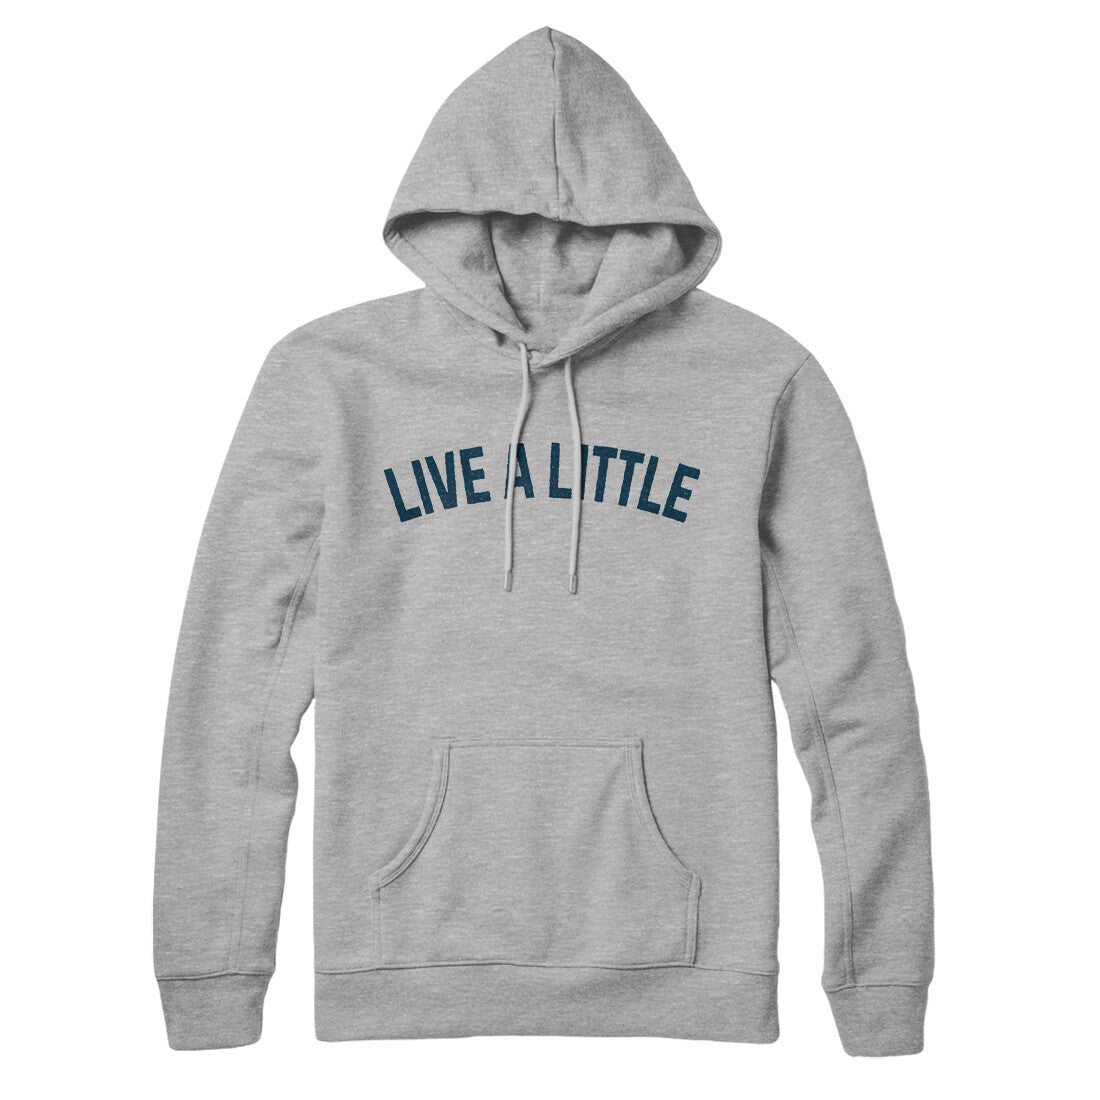 Live a Little in Heather Grey Color